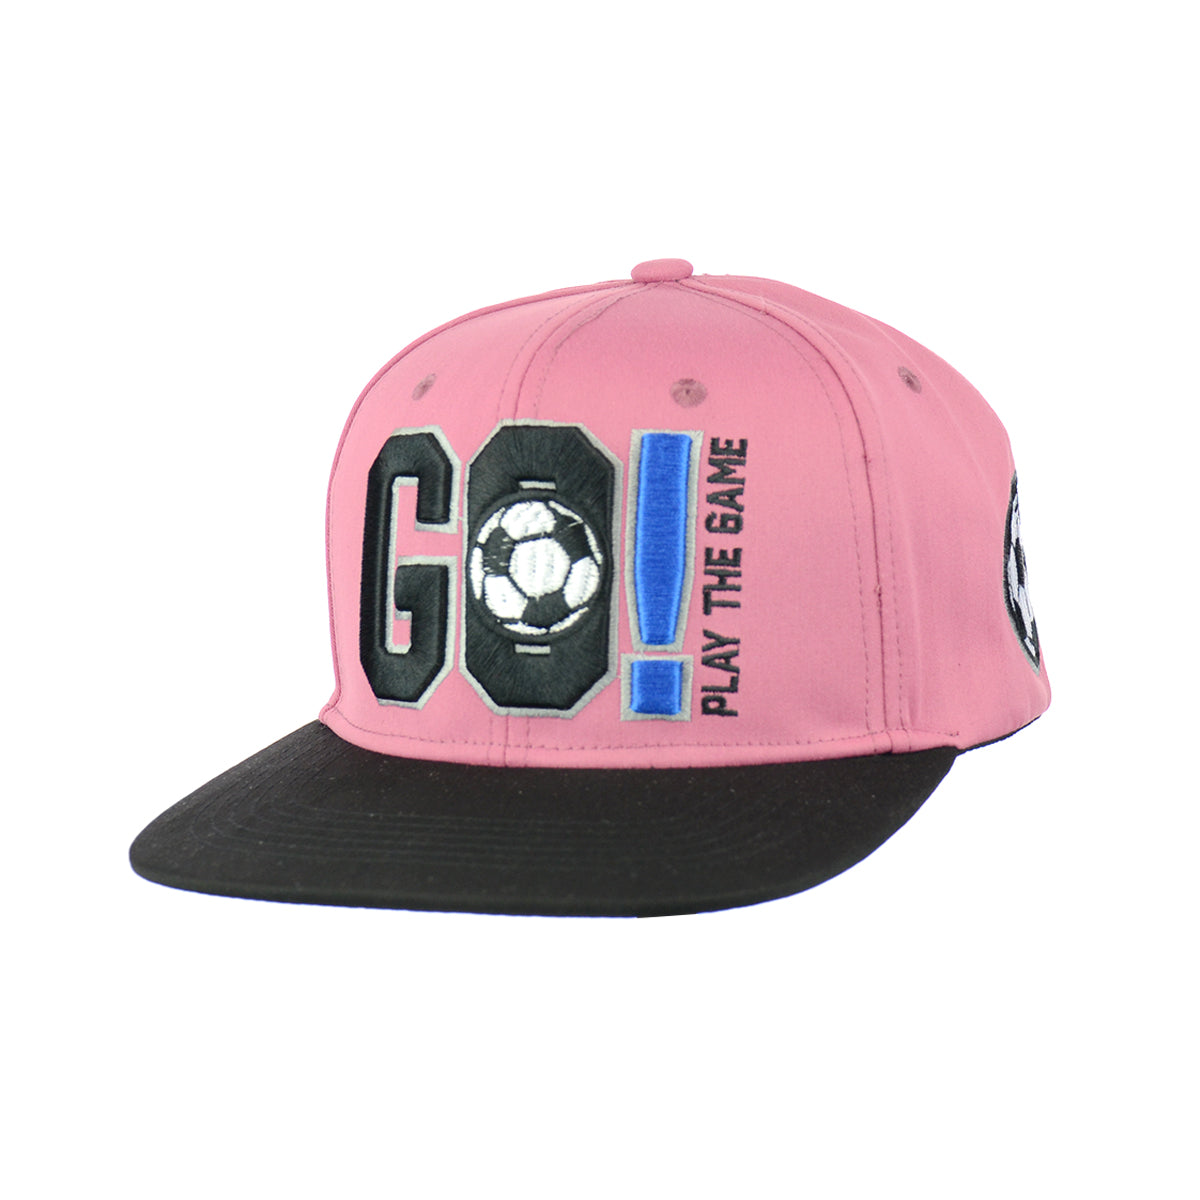 GO! Play The Game Embroidered Snapback Hat